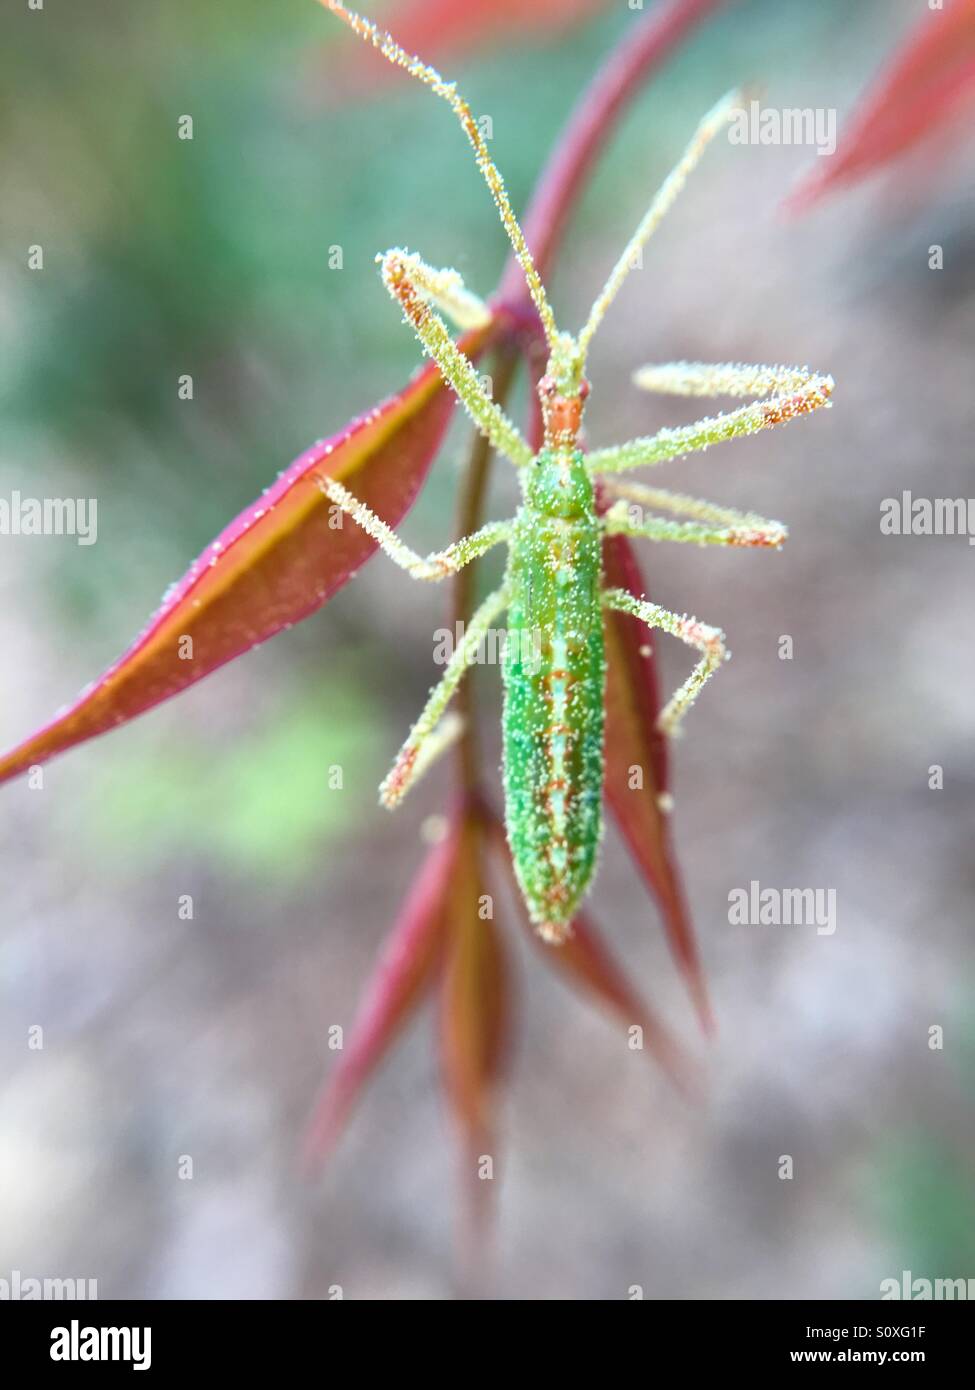 Assassin bug nymph covered in pollen Stock Photo